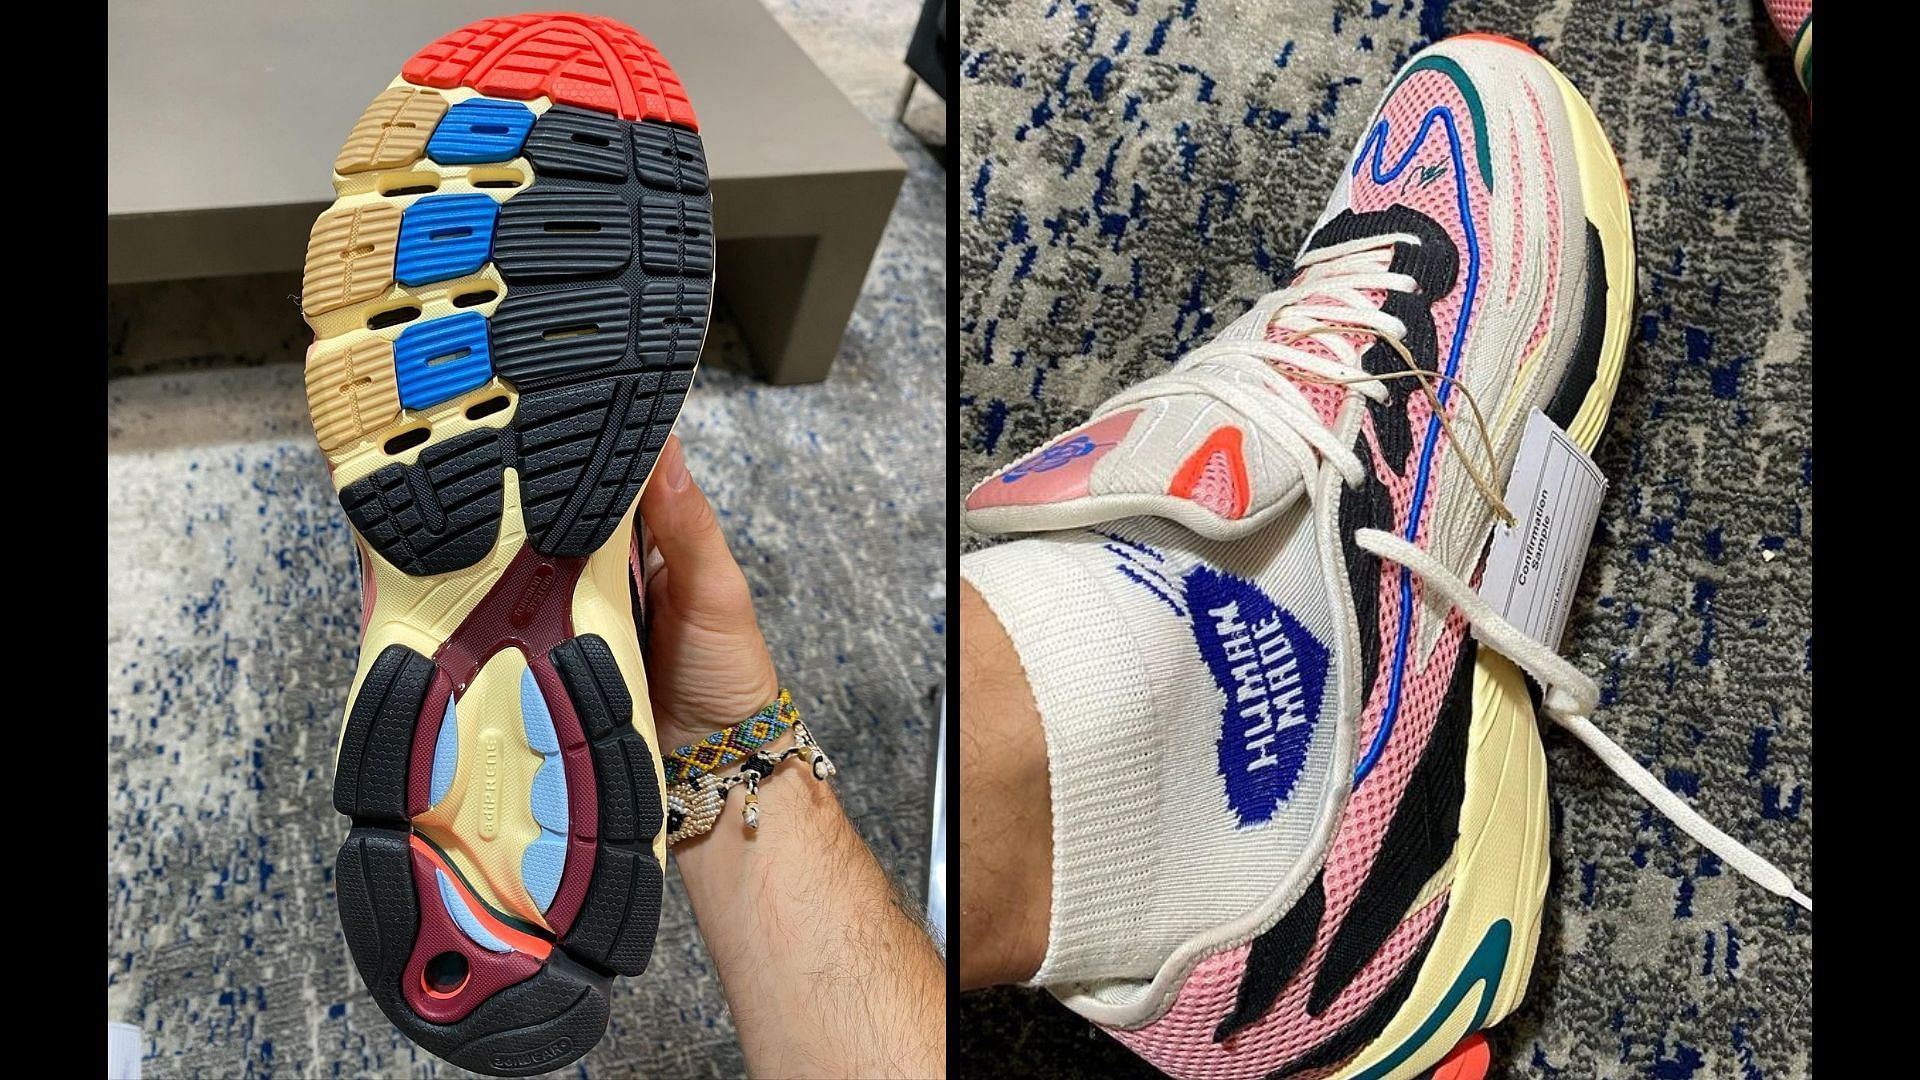 Upcoming futuristic spin over the Sean Wotherspoon x Adidas Originals Orketro sneakers (Image via @sean_wotherspoon / Instagram)